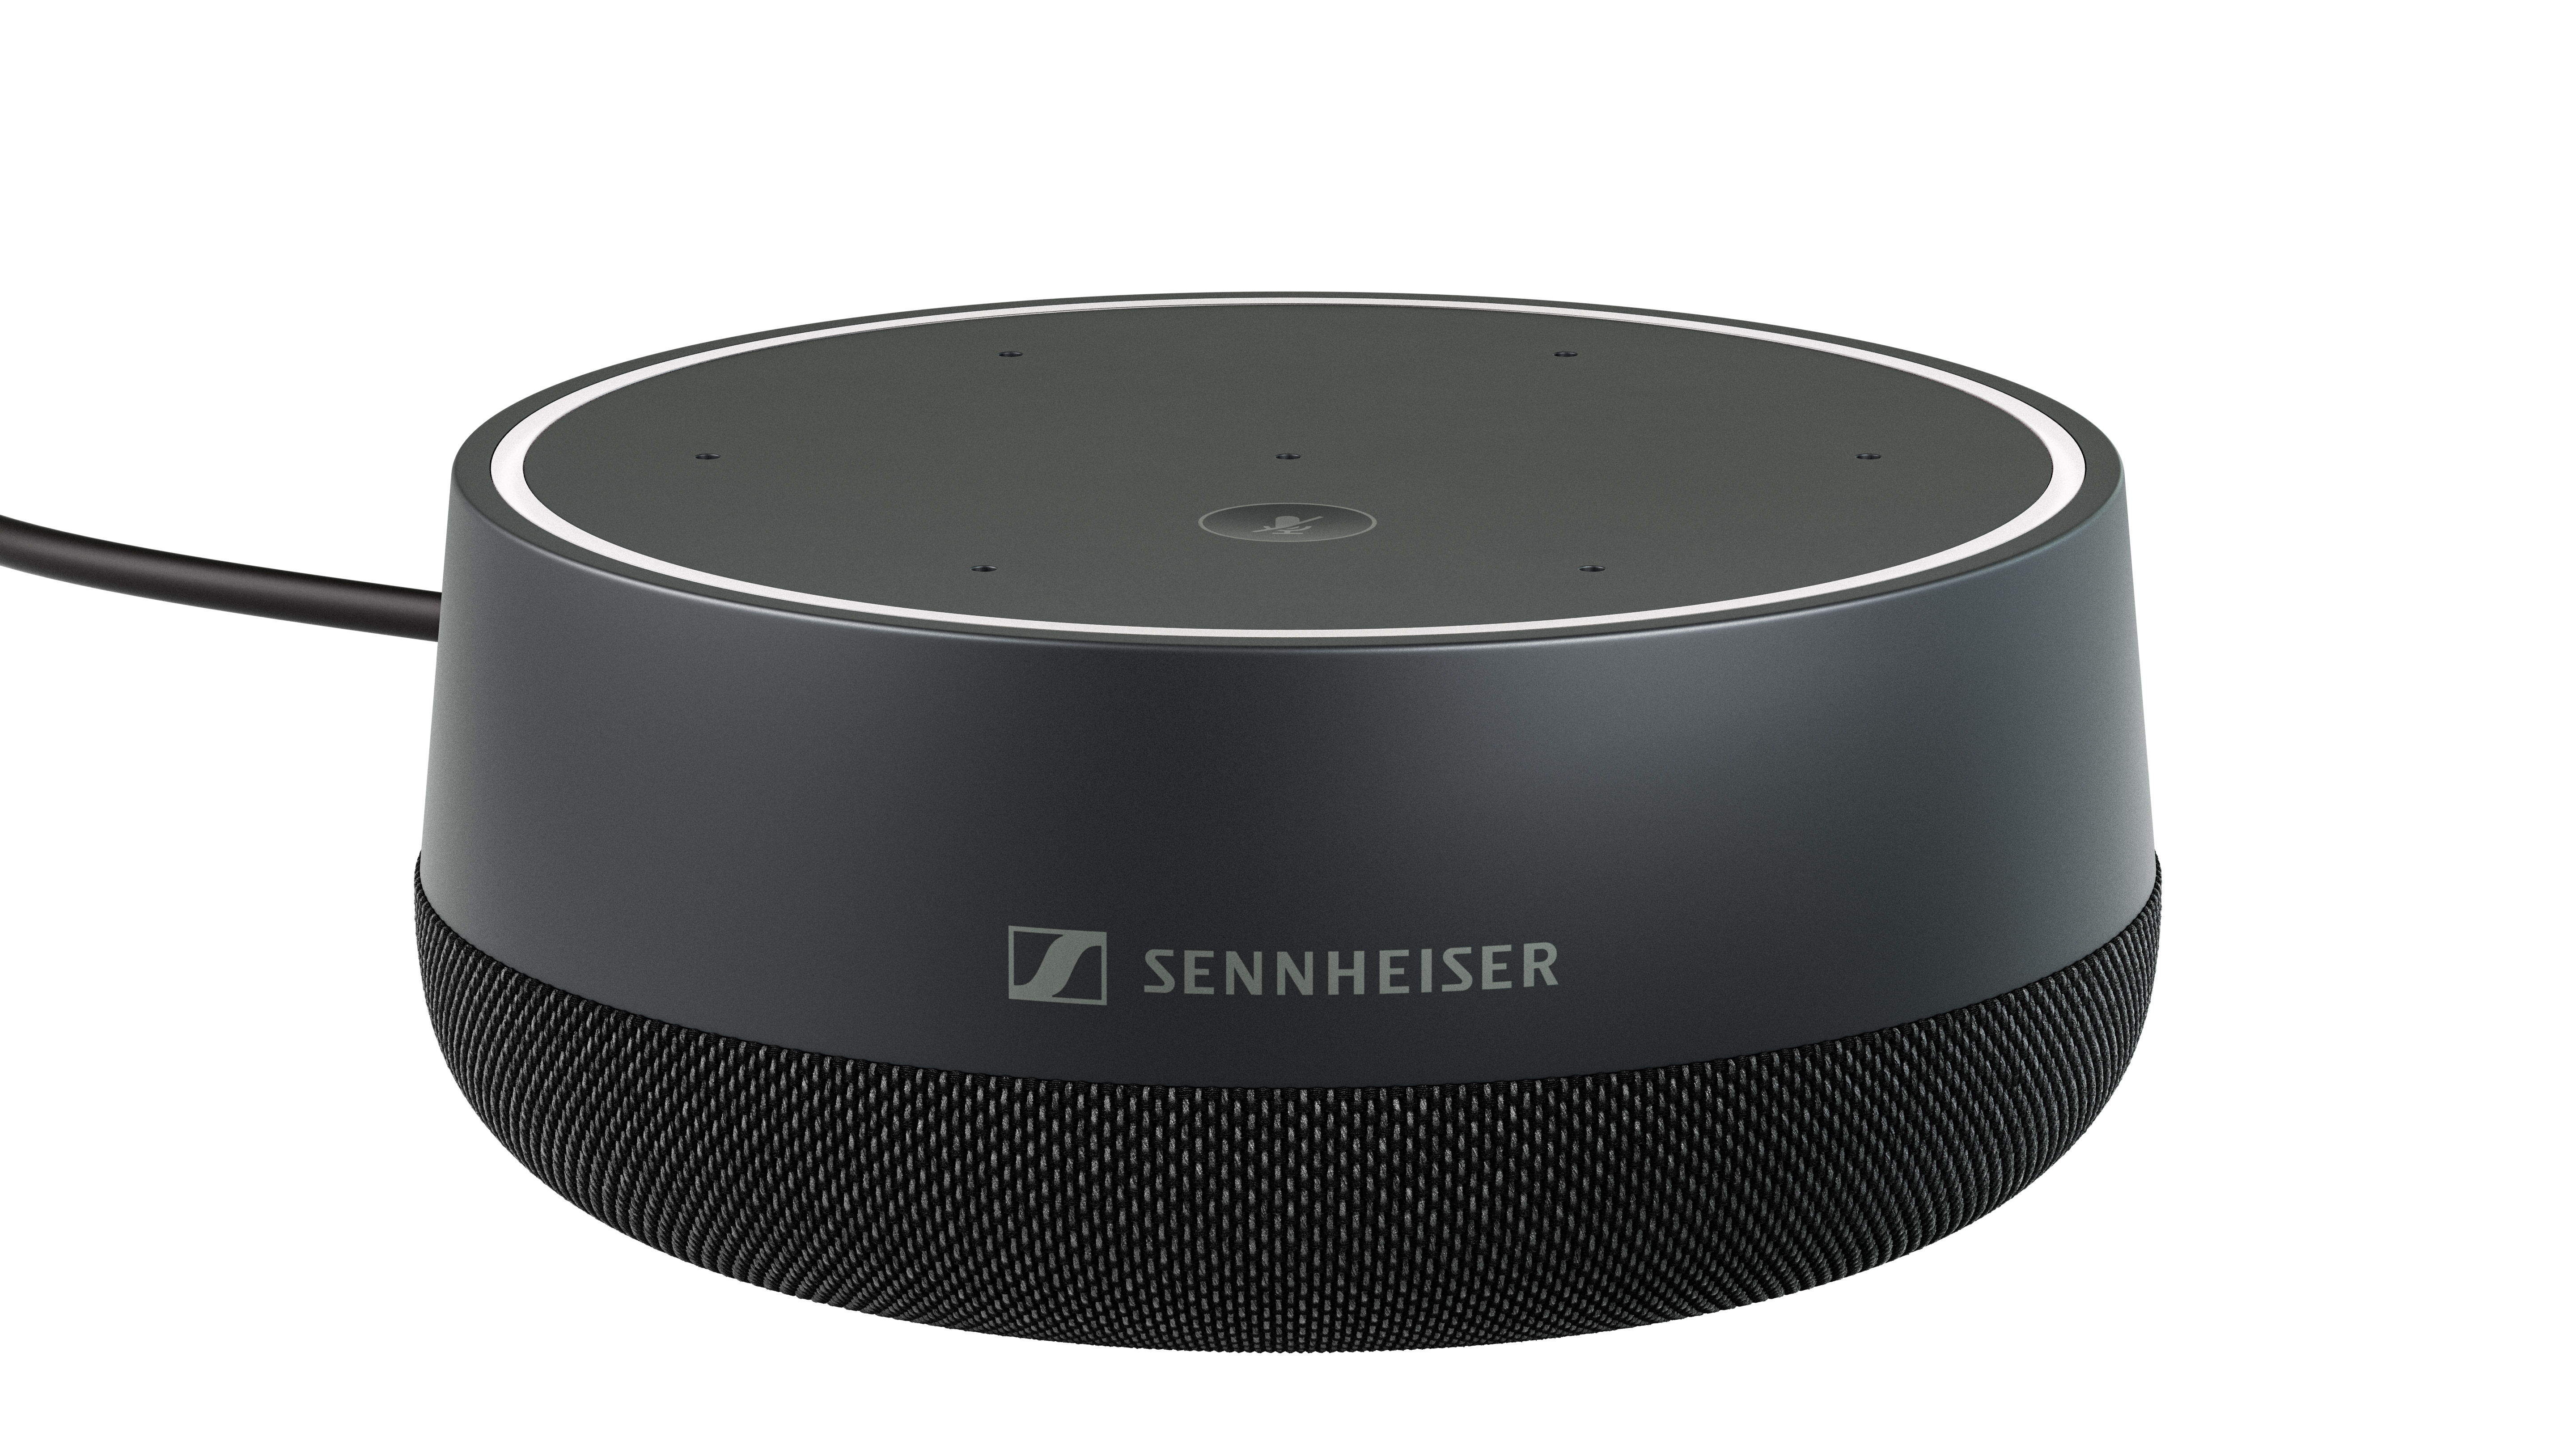 With TeamConnect Intelligent Speaker (TC ISP), Sennheiser is delivering a solution to support smart, focused and inclusive meetings for up to 10 people, whether participants are in the room or joining remotely